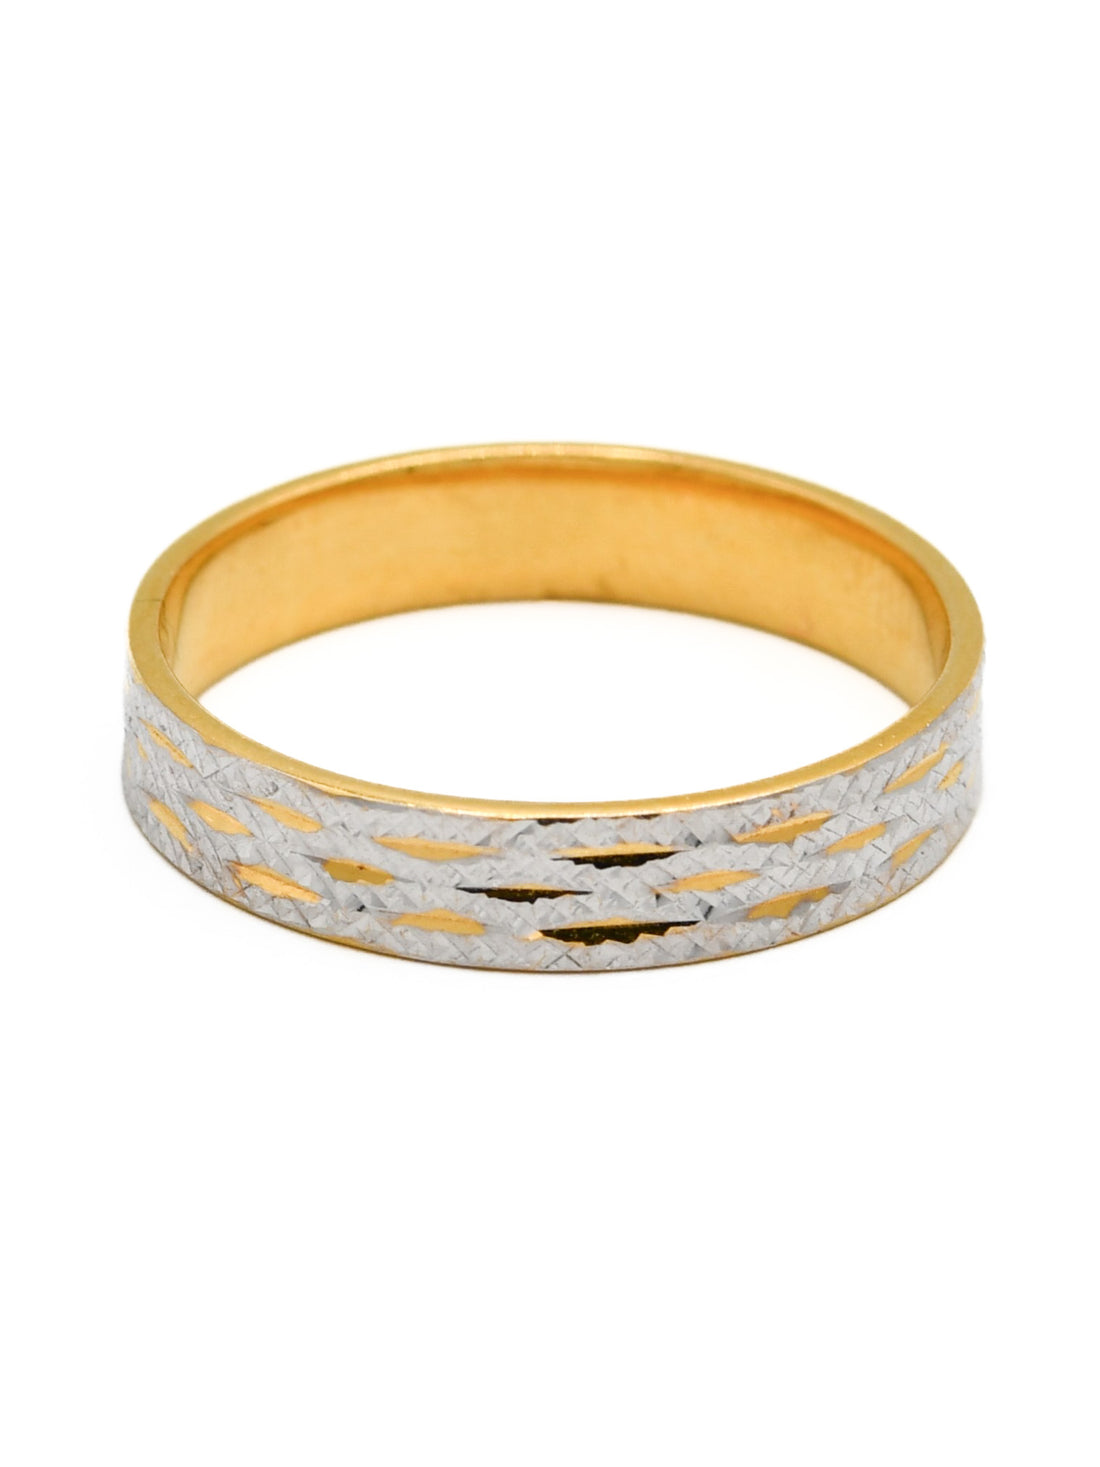 22ct Gold Two Tone Band Ring - Roop Darshan